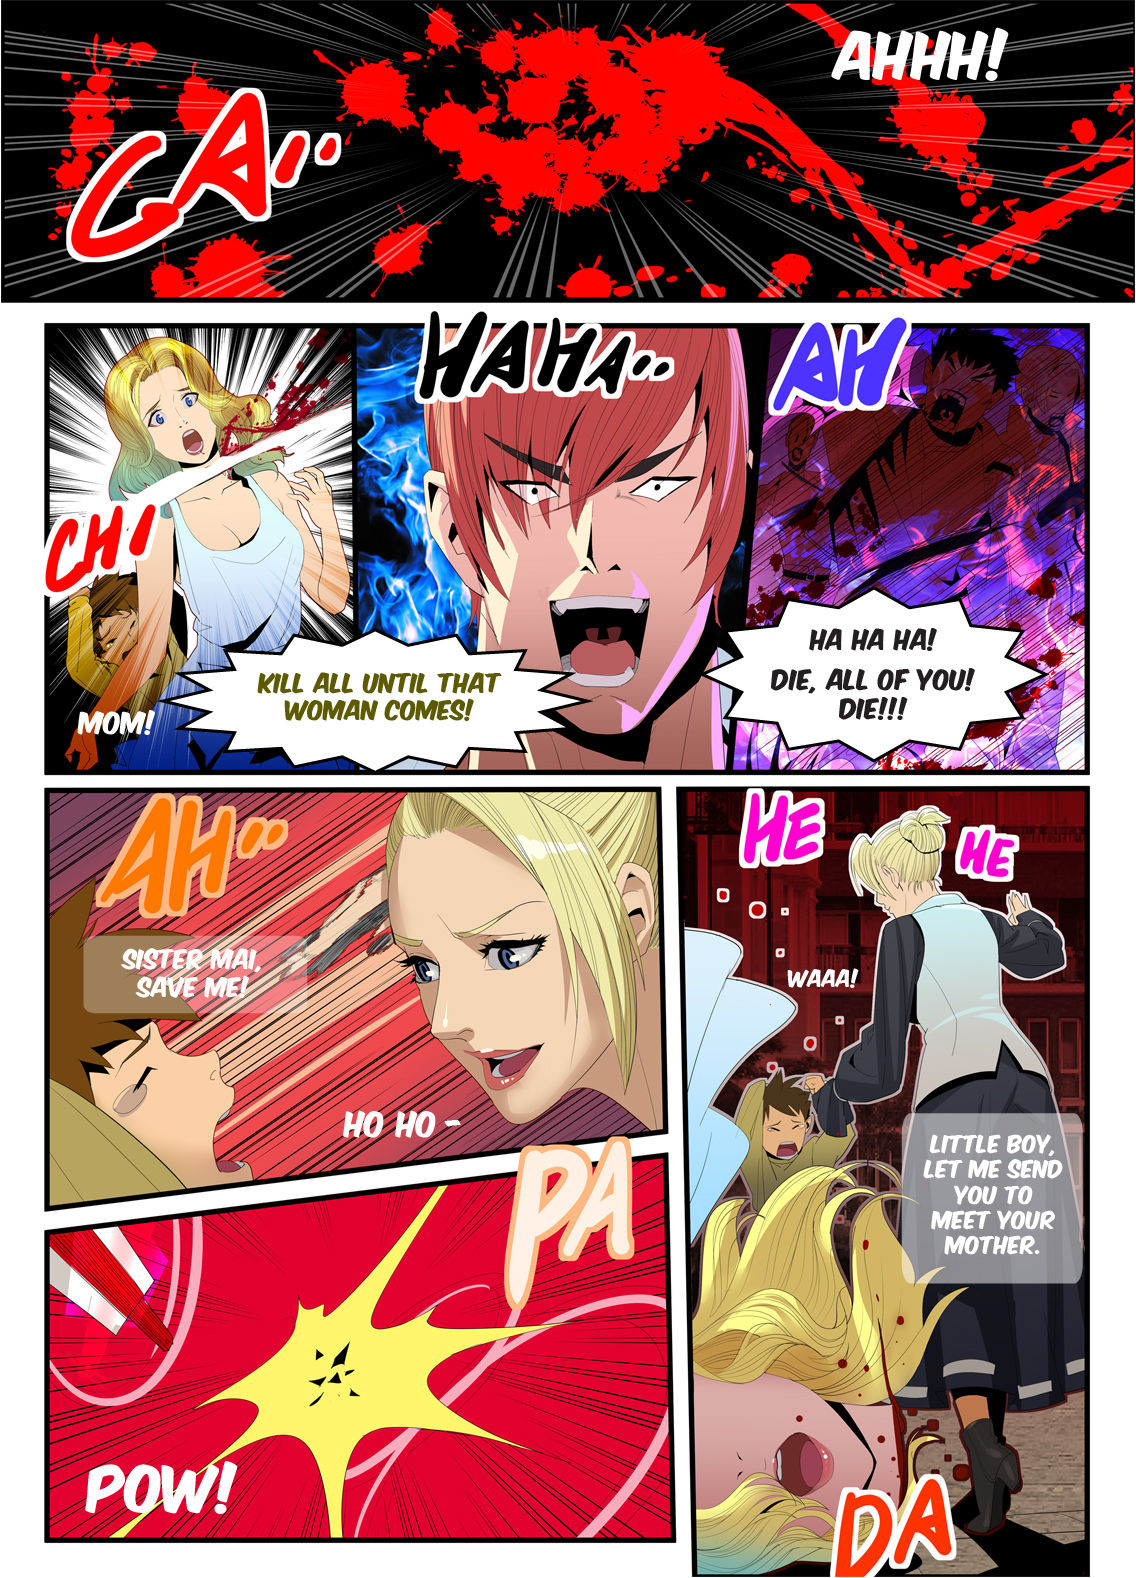 [chunlieater] The Lust of Mai Shiranui (King of Fighters) [English] [Yorkchoi & Twist] page 4 full